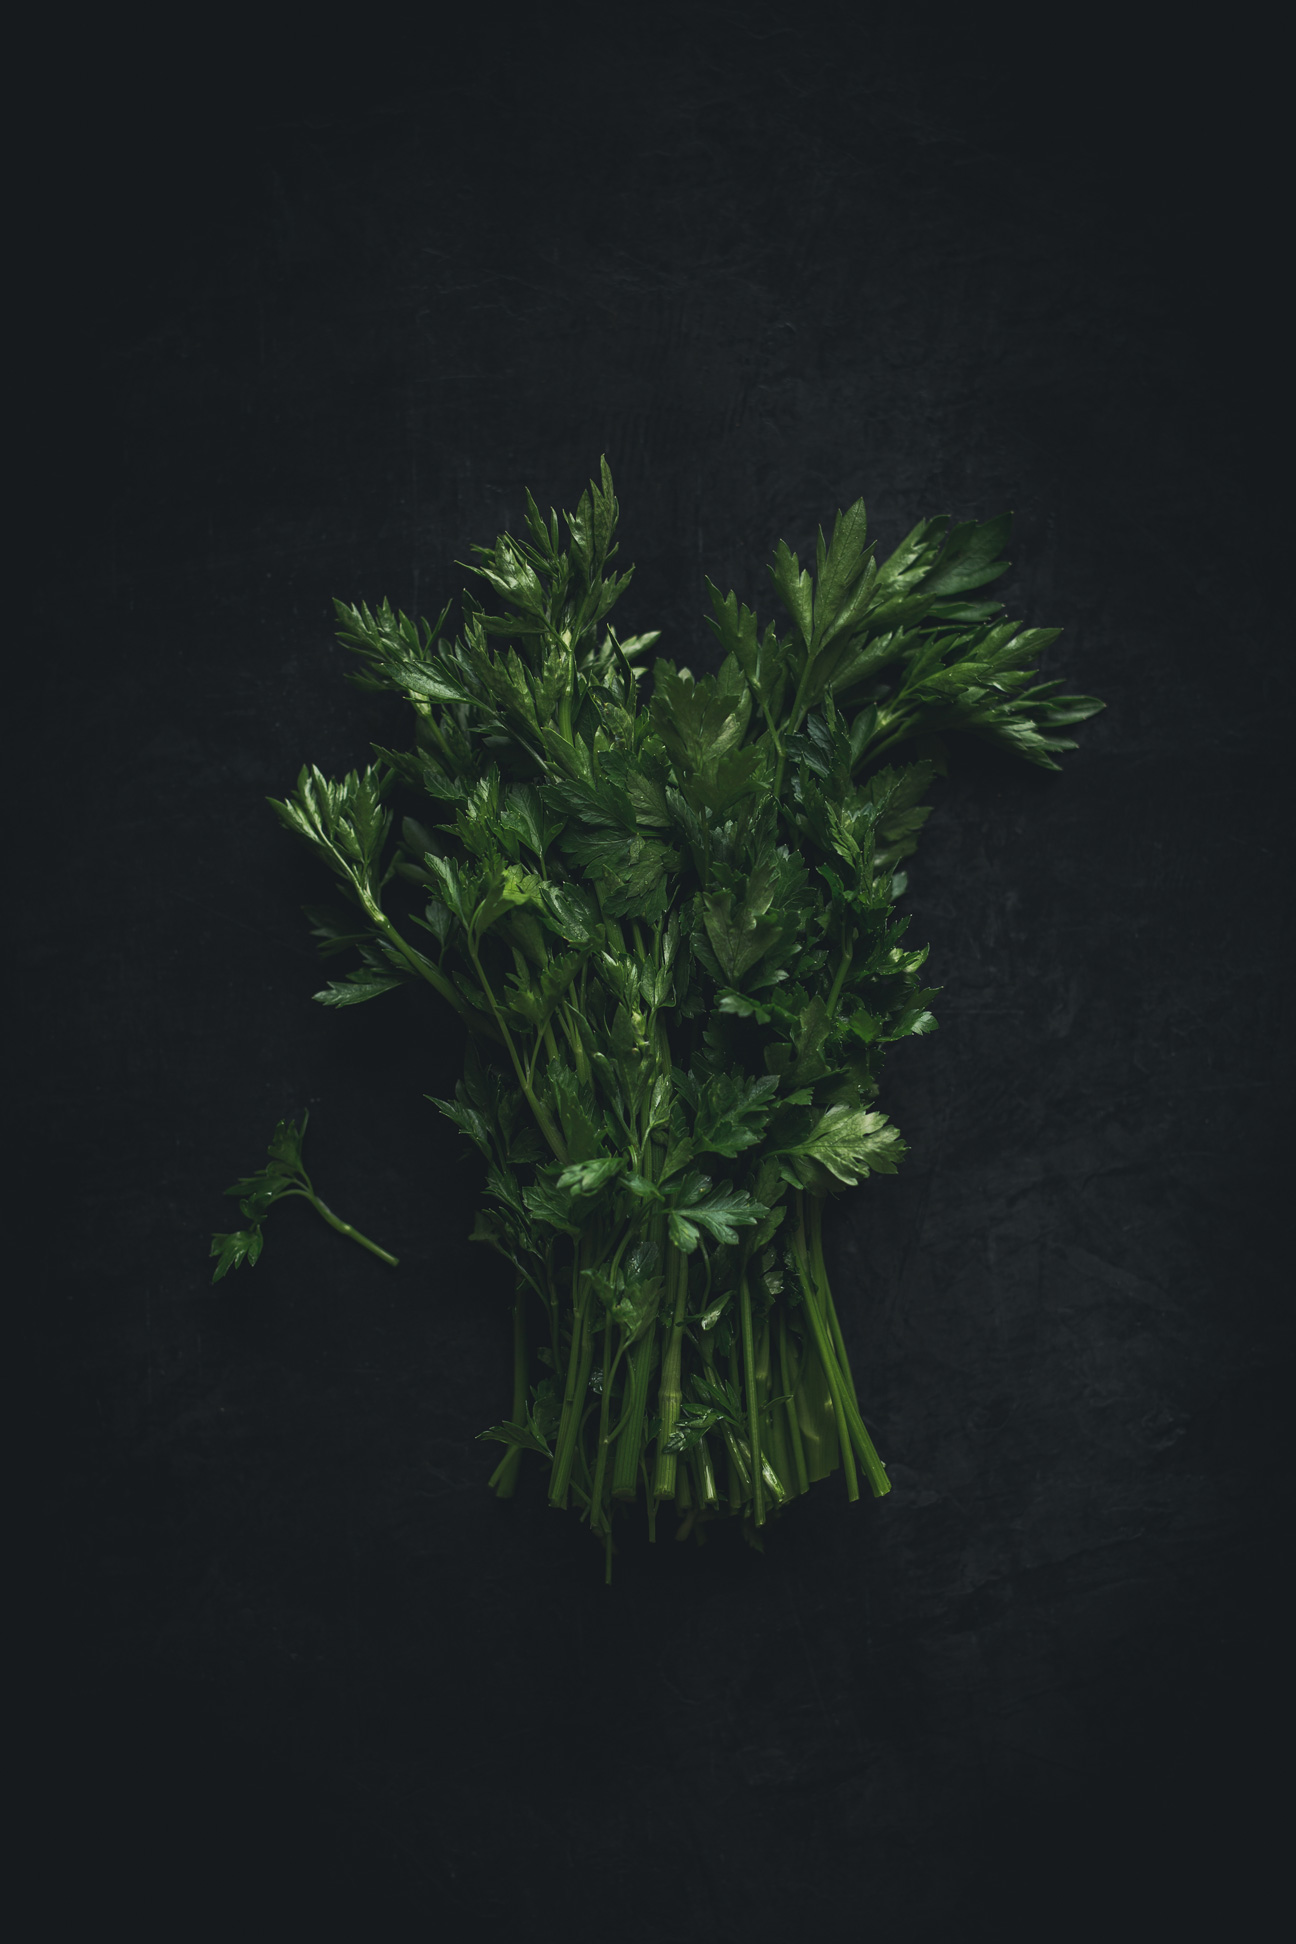 Parsley on a black background from the Moody Food series by John Robson Photography